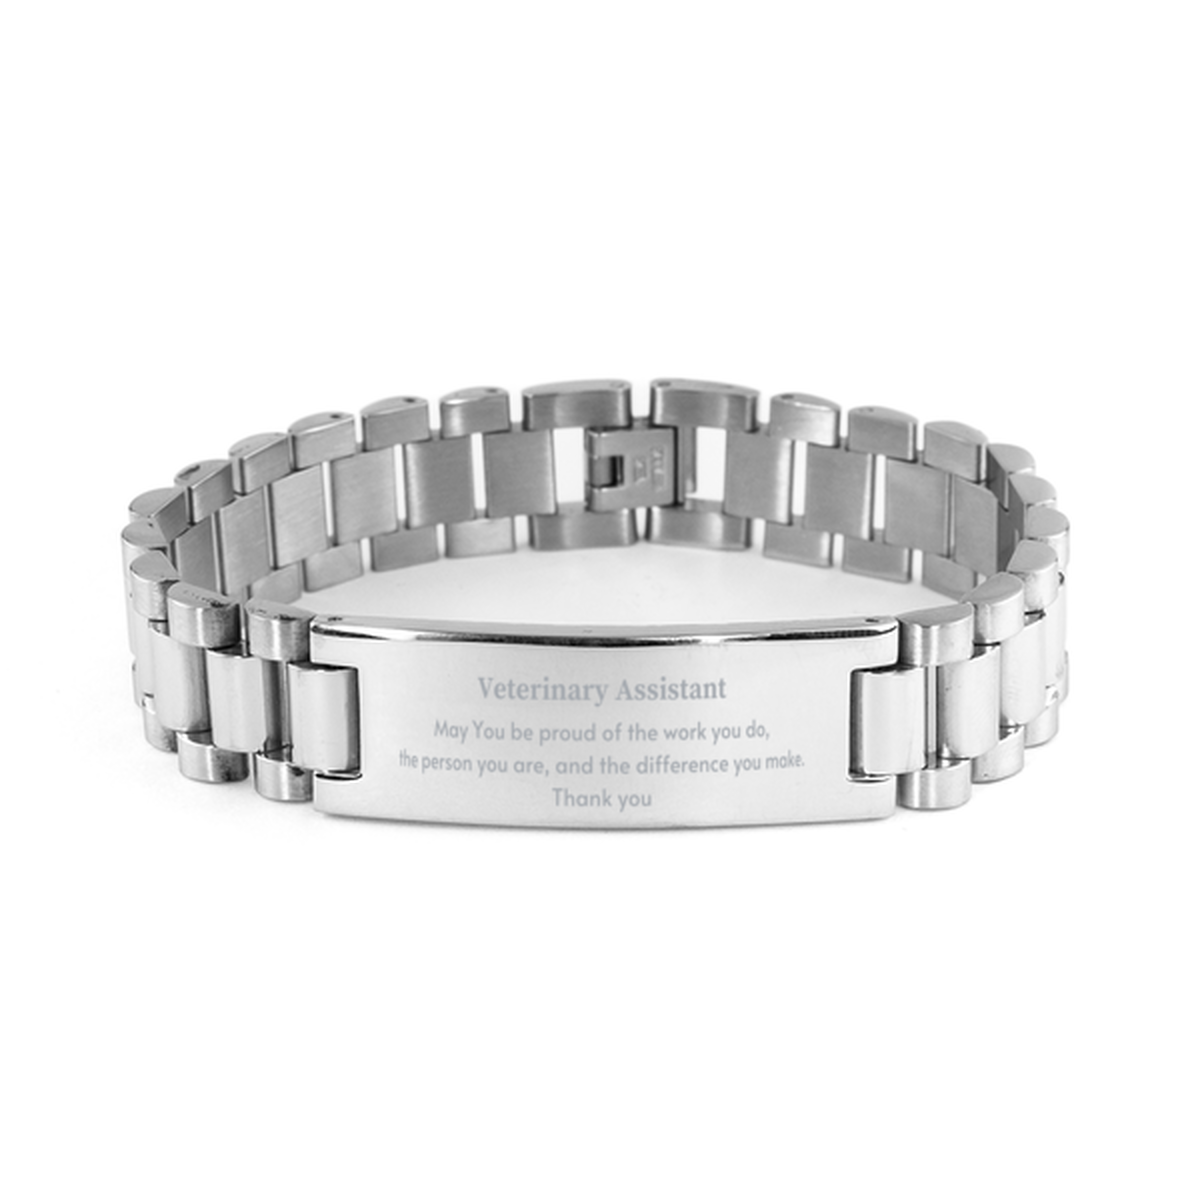 Heartwarming Ladder Stainless Steel Bracelet Retirement Coworkers Gifts for Veterinary Assistant, Veterinary Assistant May You be proud of the work you do, the person you are Gifts for Boss Men Women Friends